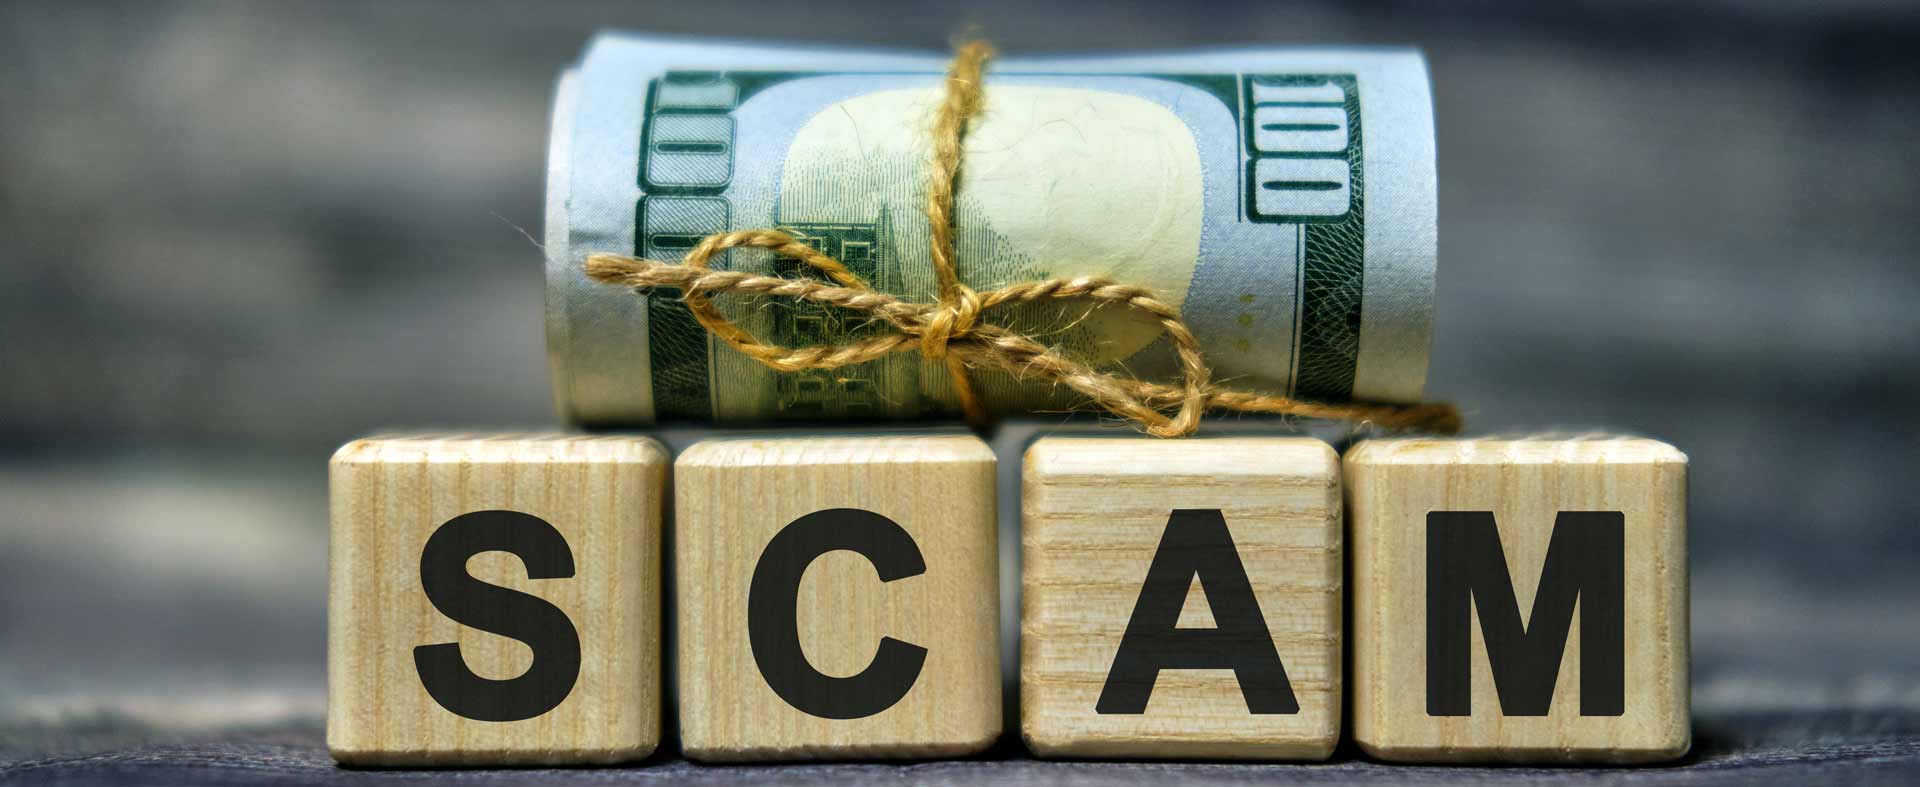 Expert Tips to Avoid the Next Nigeria Scam